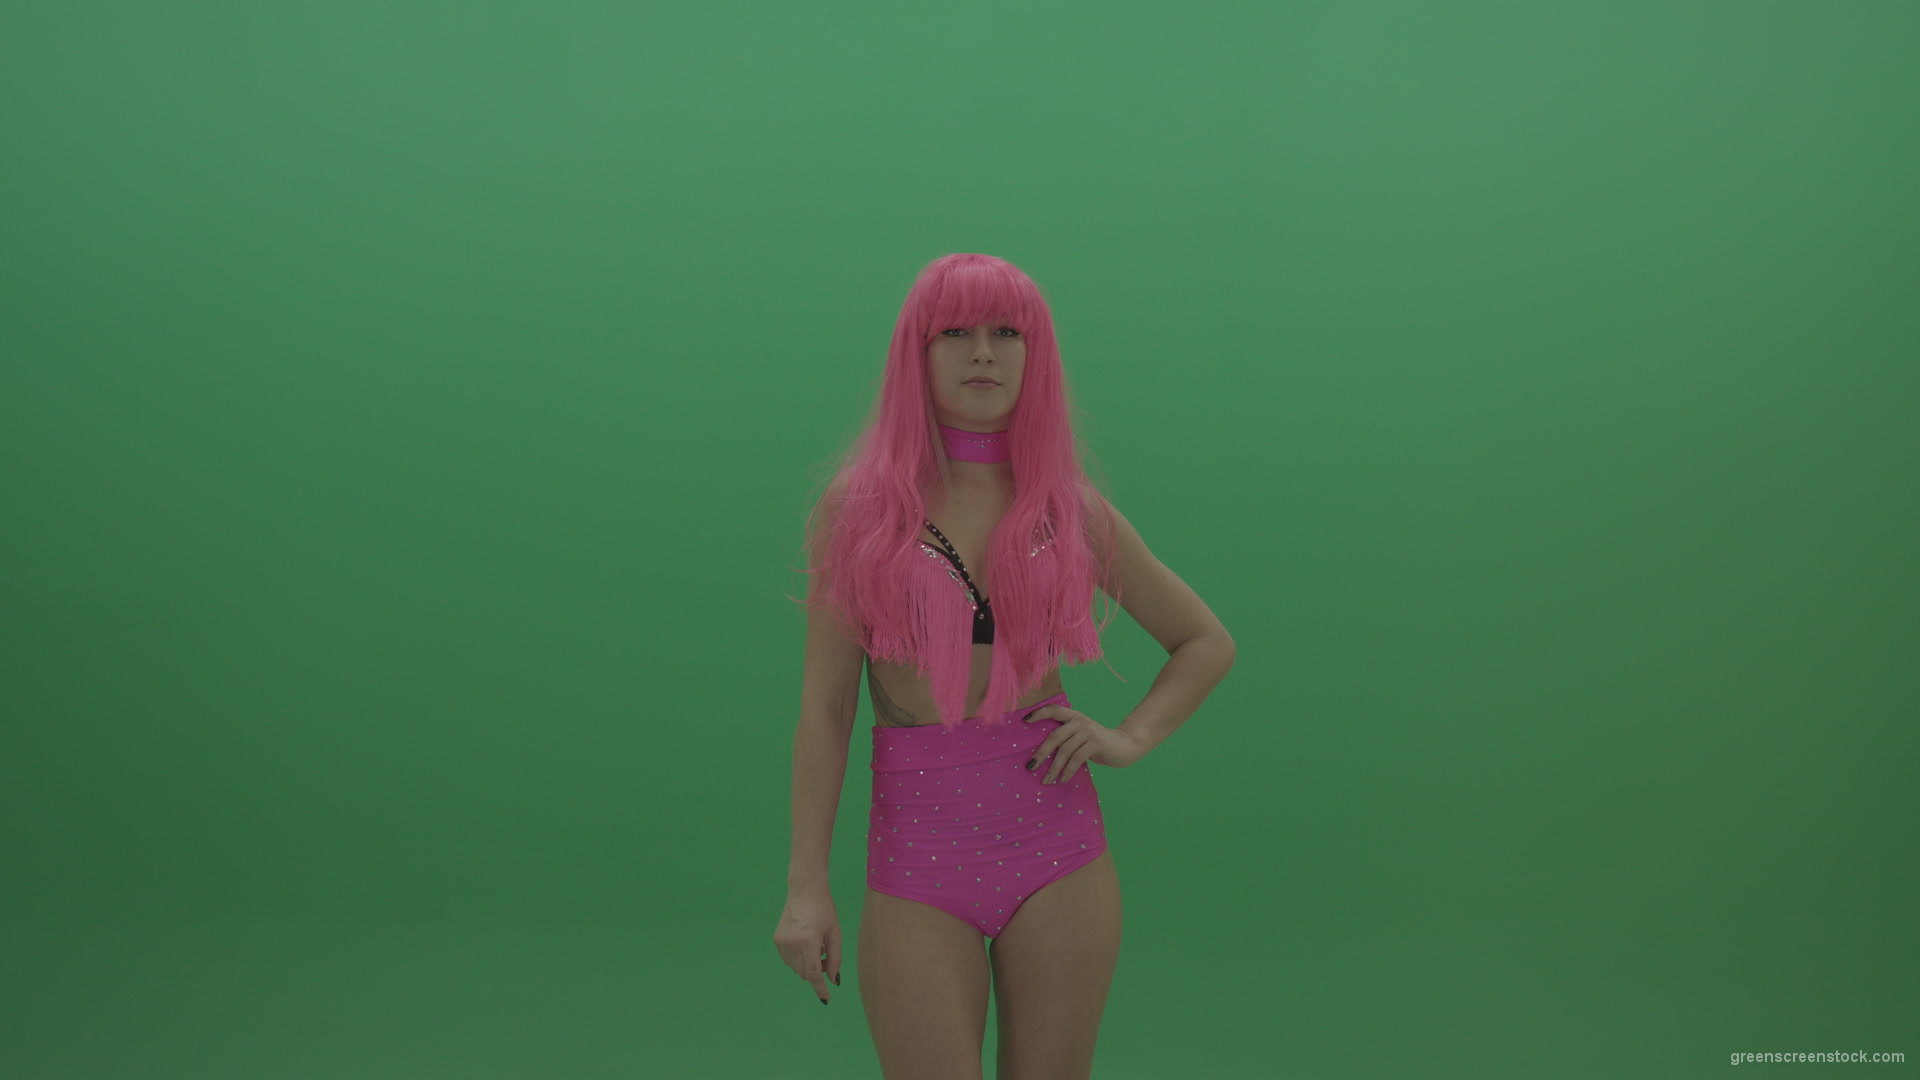 Gogo-dancer-in-pink-displays-an-amazing-pose-over-chromakey-background_001 Green Screen Stock